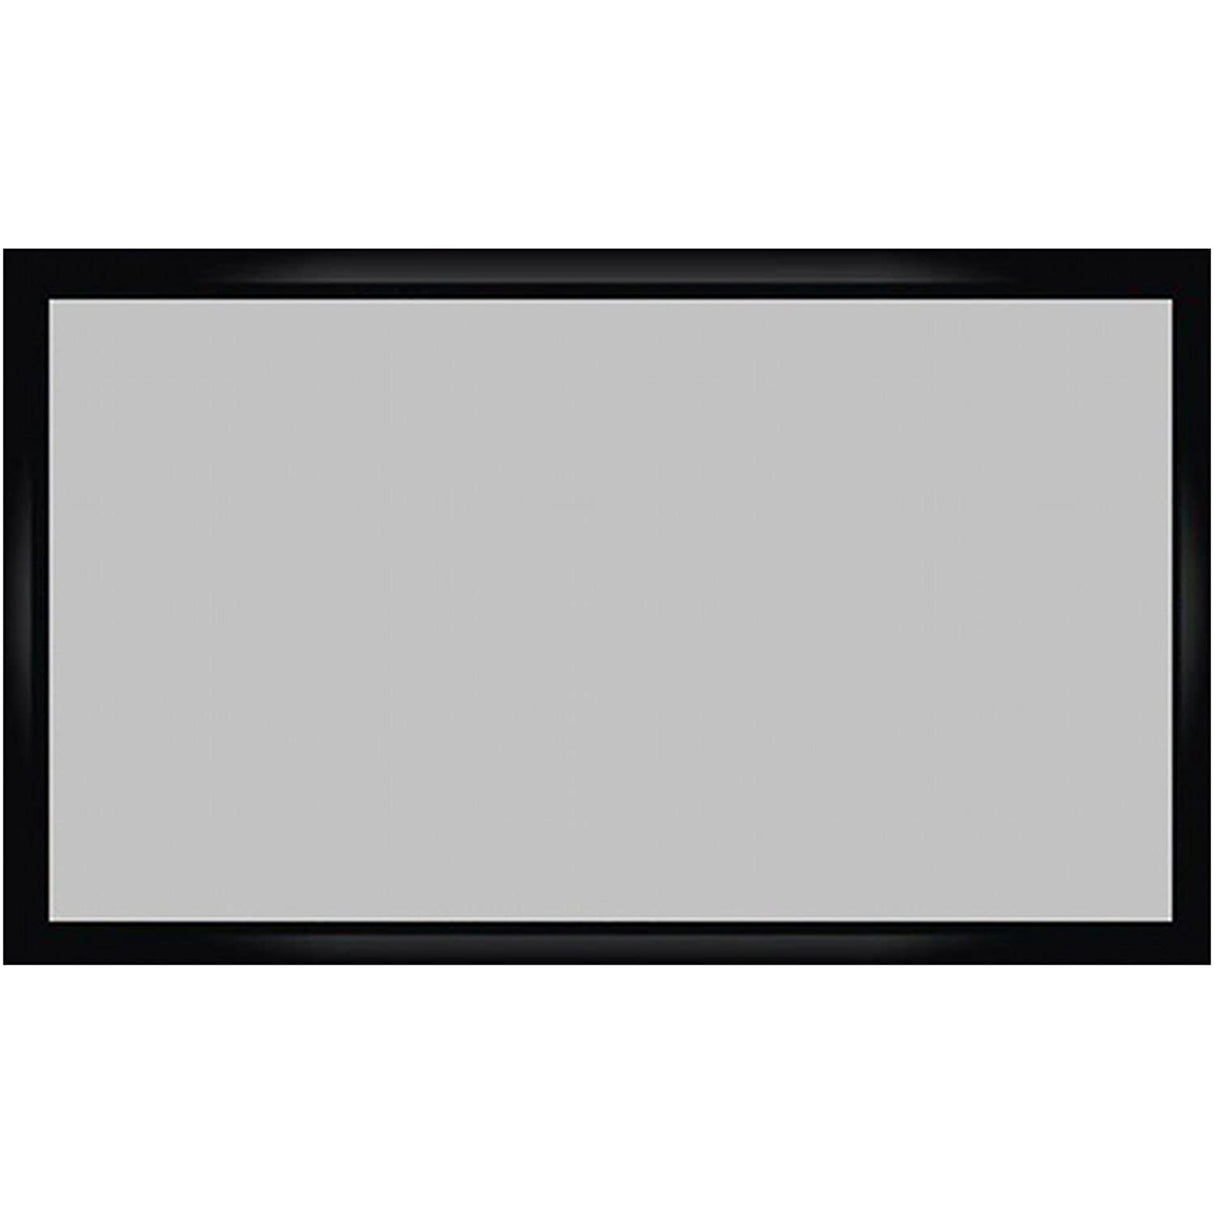 Prime Eco-line Grey Fabric Ambient Light Rejection (ALR) Flat Fixed Frame Projection Screen 133" (For Long Throw Projectors)